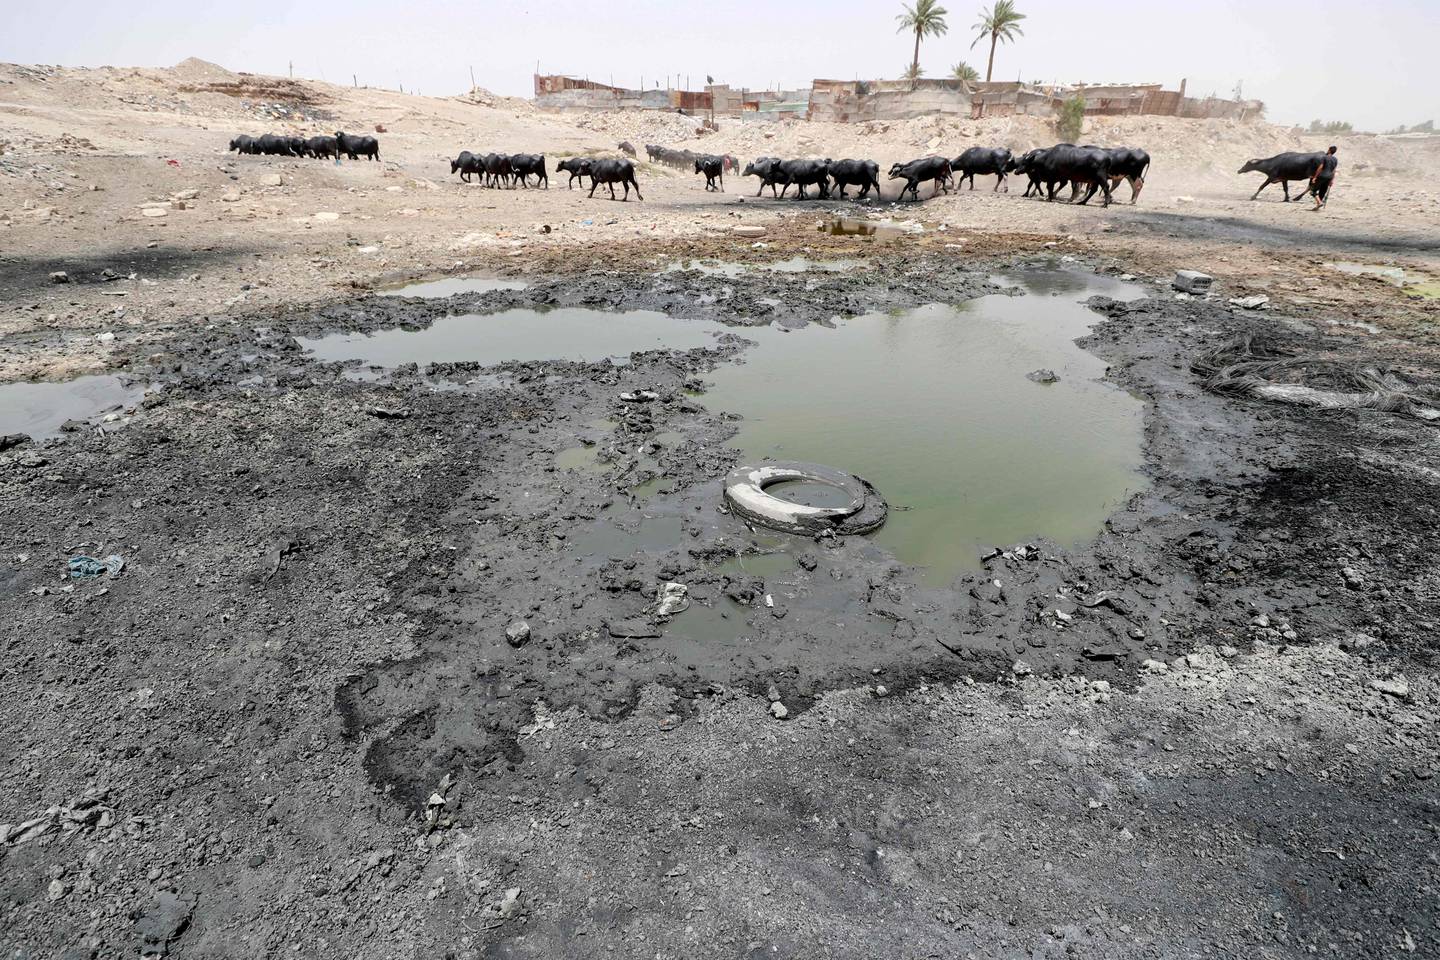 Iraq faces a number of other severe issues, including drought. AFP